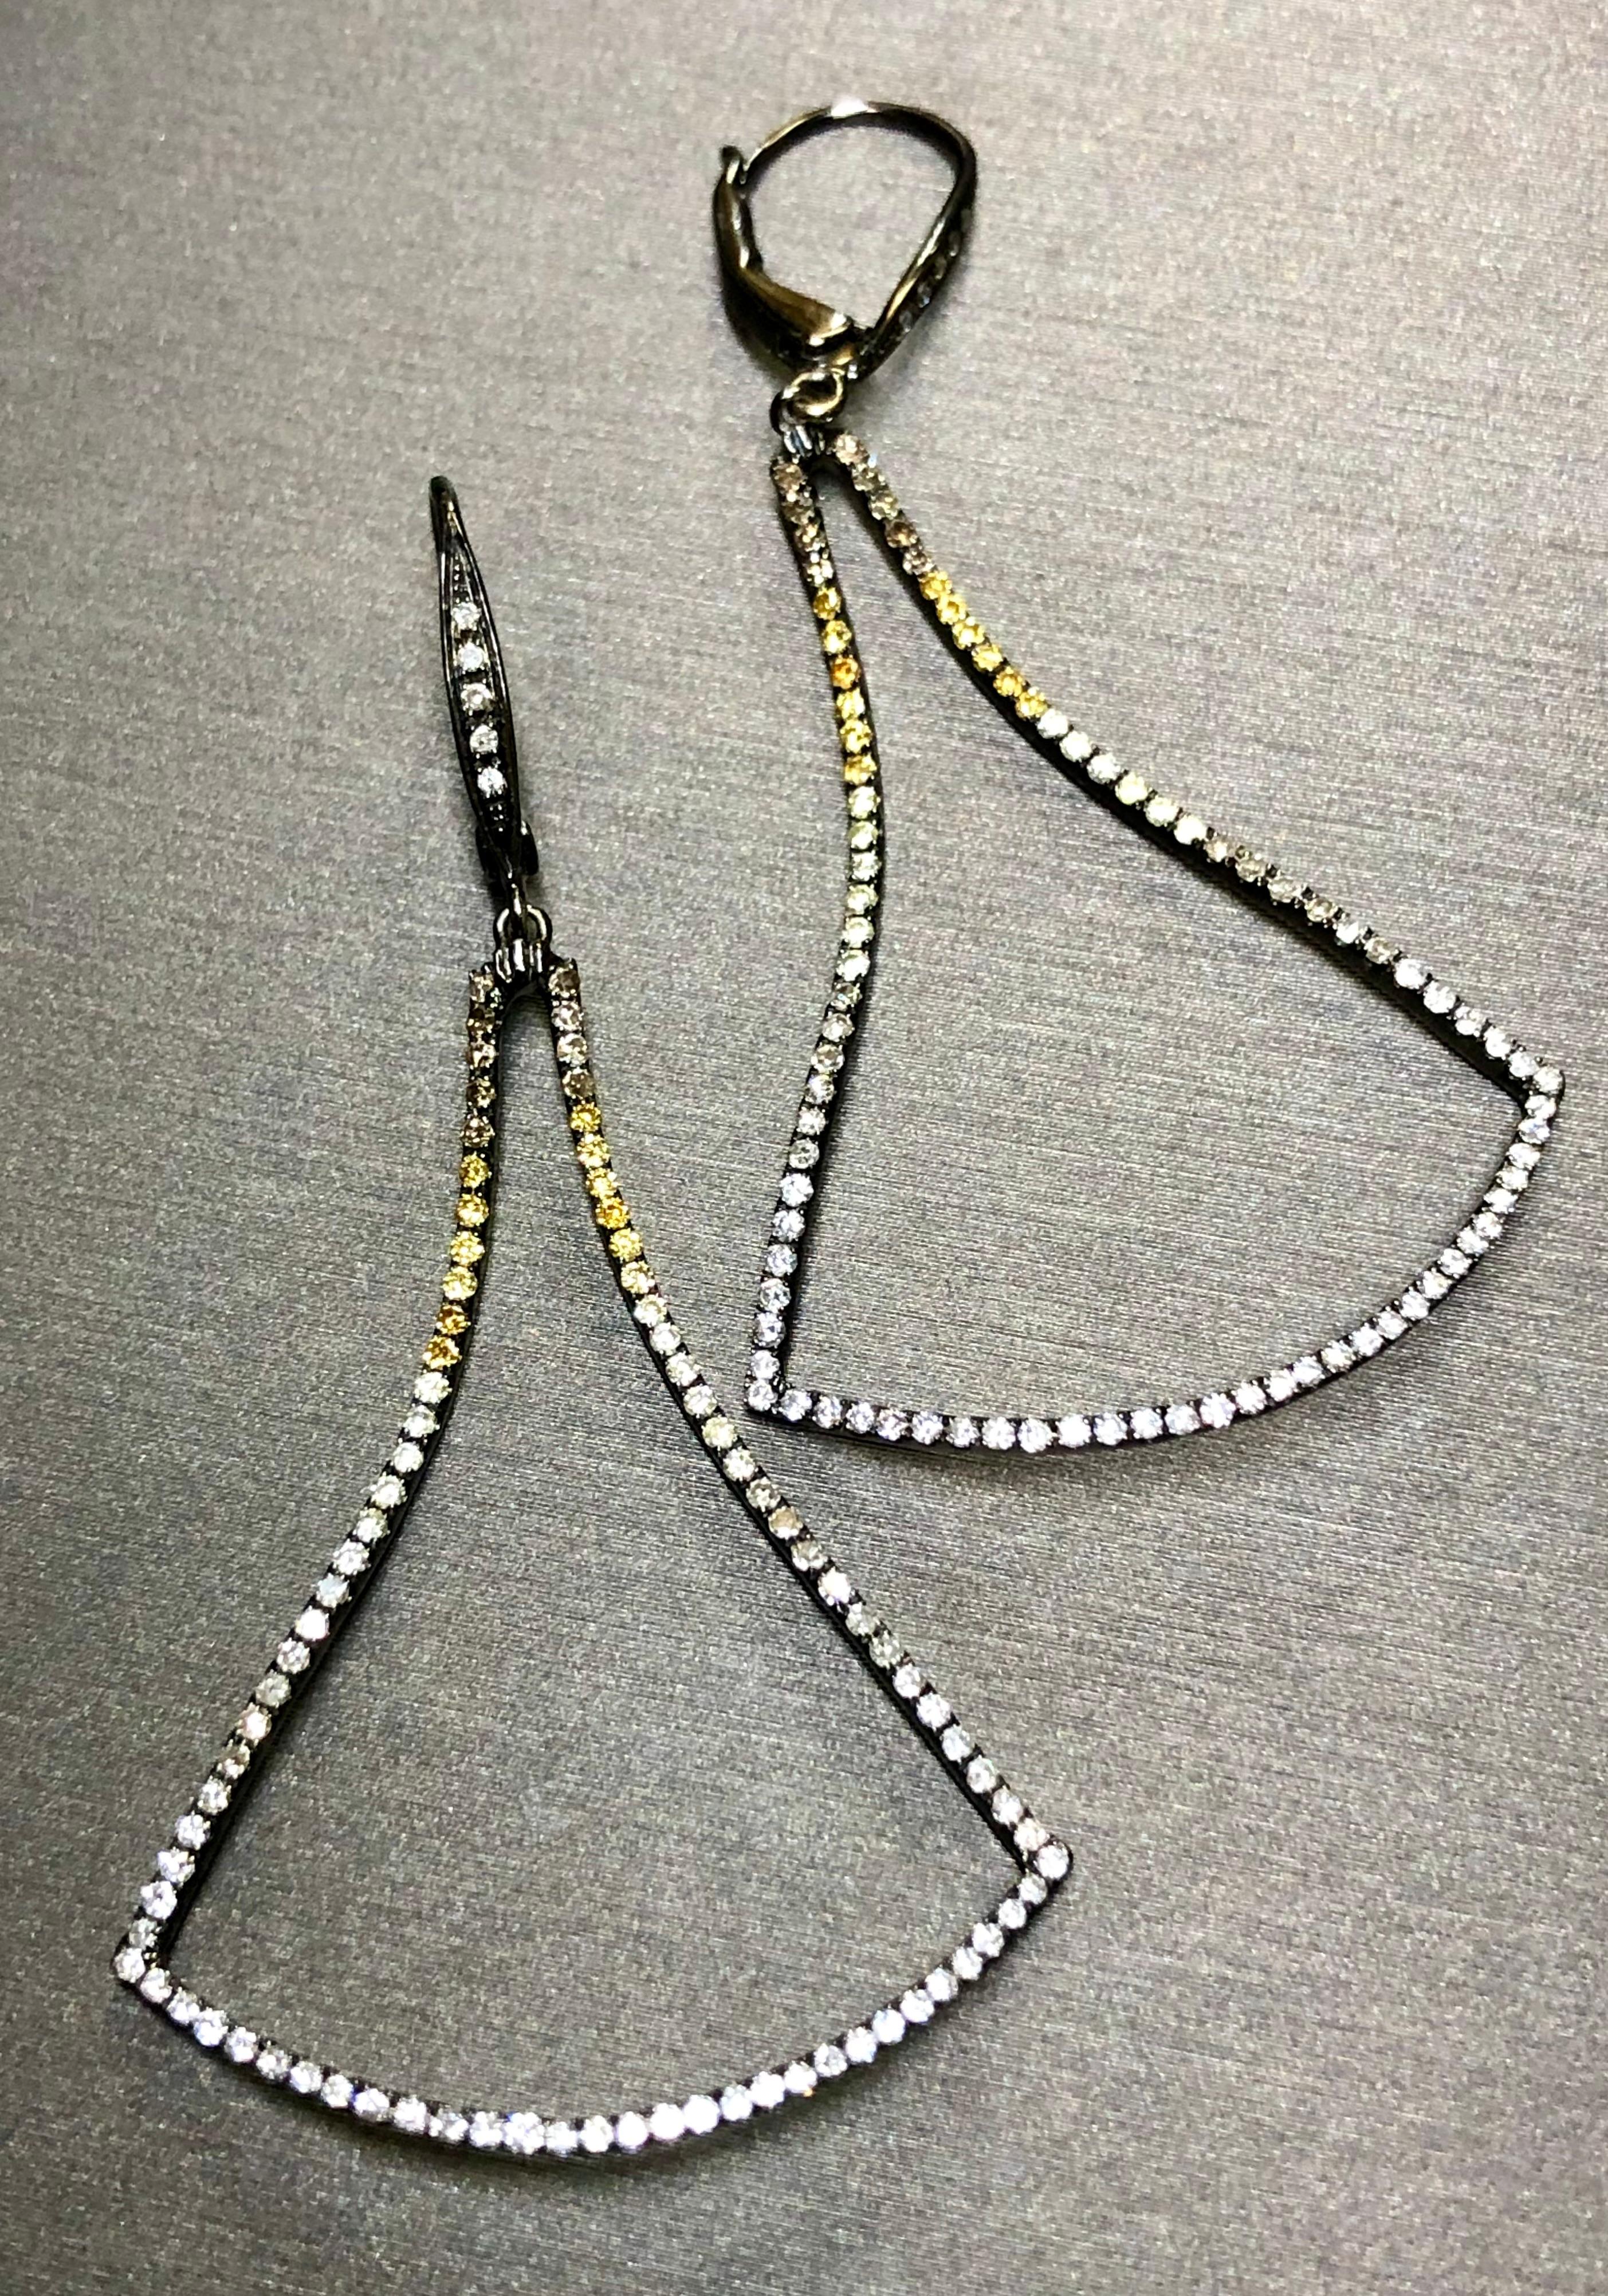 A contemporary pair of earrings done in 18K white gold and finished in black rhodium set with 180 round diamonds ranging from G color white diamonds all the way through brown and yellow fancy color diamonds with all stones ranging Si1 to I1 in